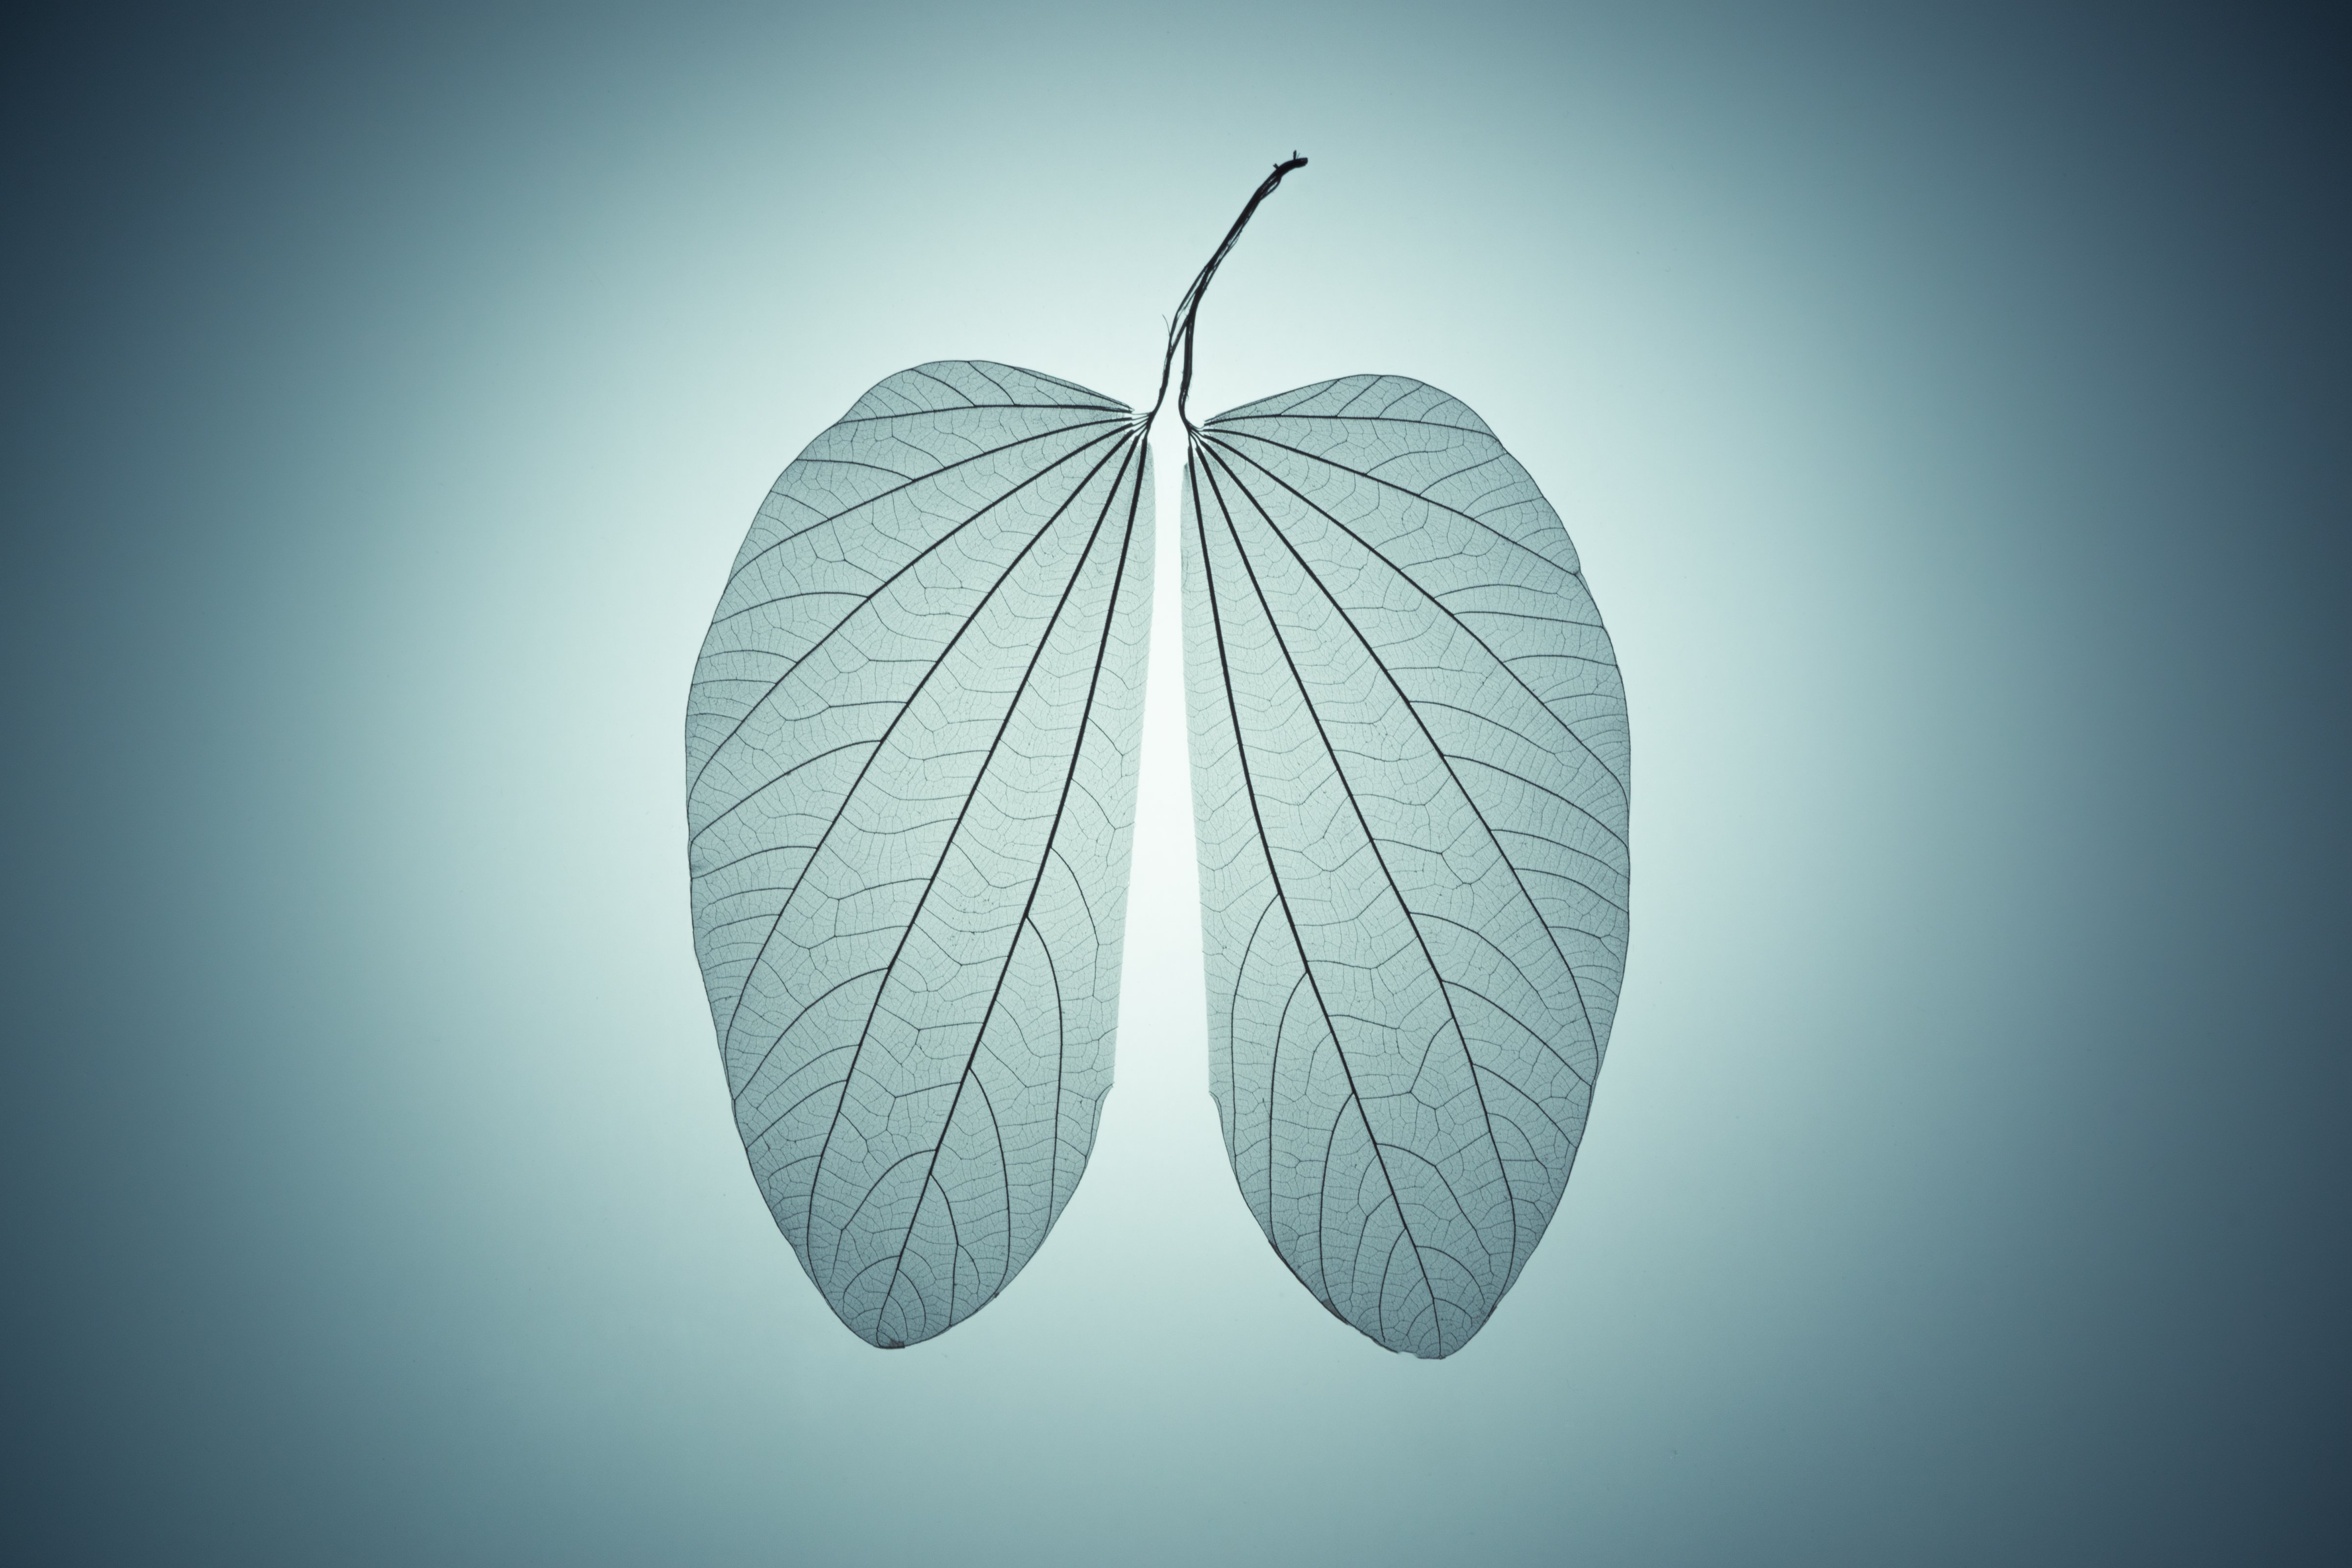 Lung Shape Leaf Skeleton Close-up View on Blue Cyan Background. (Getty Images)